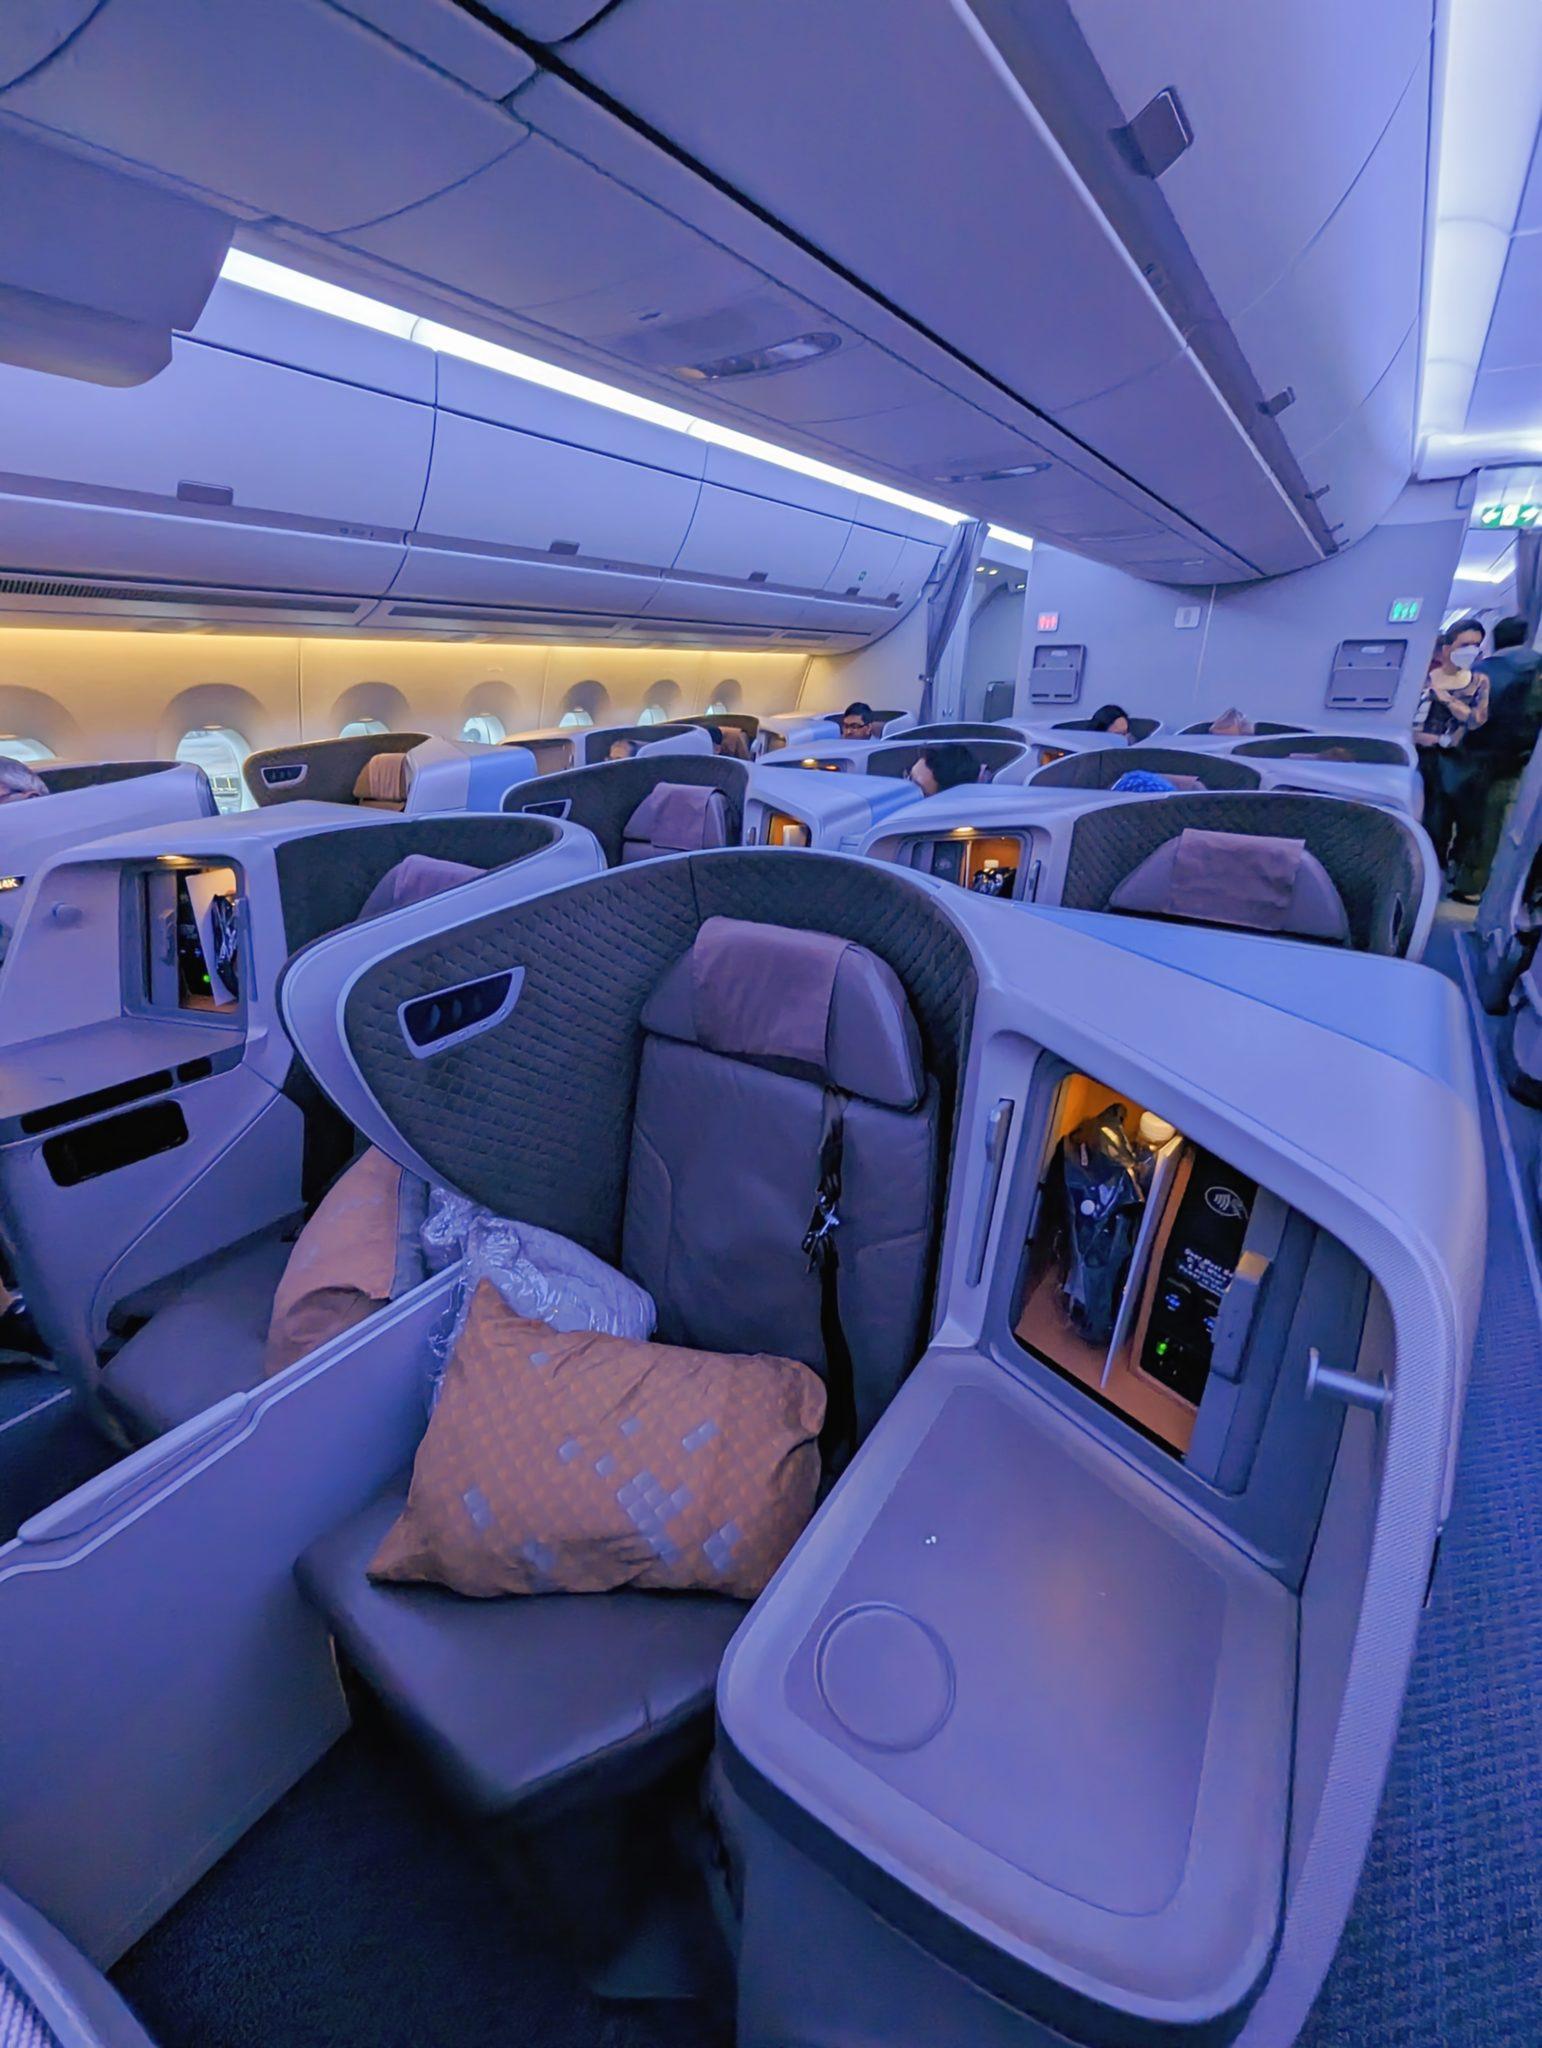 Review: Singapore Airlines Lackluster Business Class to Sydney